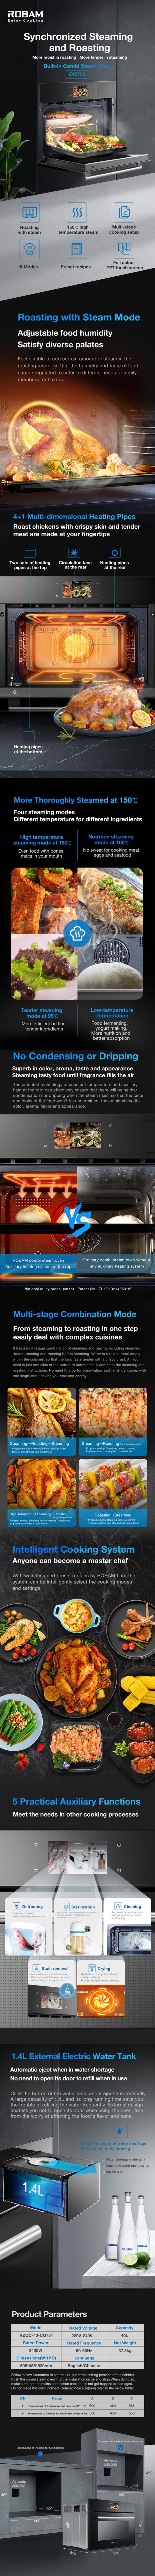 Roasting with steam mode,can adjustable food humidity.Feel eligible to add certain amount of steam in the roasting mode, so that the humidity and taste of food can be regulated to cater to different needs of family members for flavors<br />
4 steaming modes,different temperature for different ingredients.<br />
①High temperature steaming mode at 150℃②Nutrition steaming mode at 100℃③Tender steaming mode at 95℃④Low-temperature fermentation<br />
Multi-stage combination mode<br />
It has a multi-stage combination of steaming and baking, including steaming before roasting and roasting before steaming. All you need is just one click of the button to automatically complete the steaming and roasting instructions.<br />
5 practical auxiliary functions<br />
①Defrosting  40-80°C②Sterilization with high temperature steam③Automatic spraying steam④One-button-click to remove stains with nothing to worry about⑤Heated-air drying and internal cavity moisture